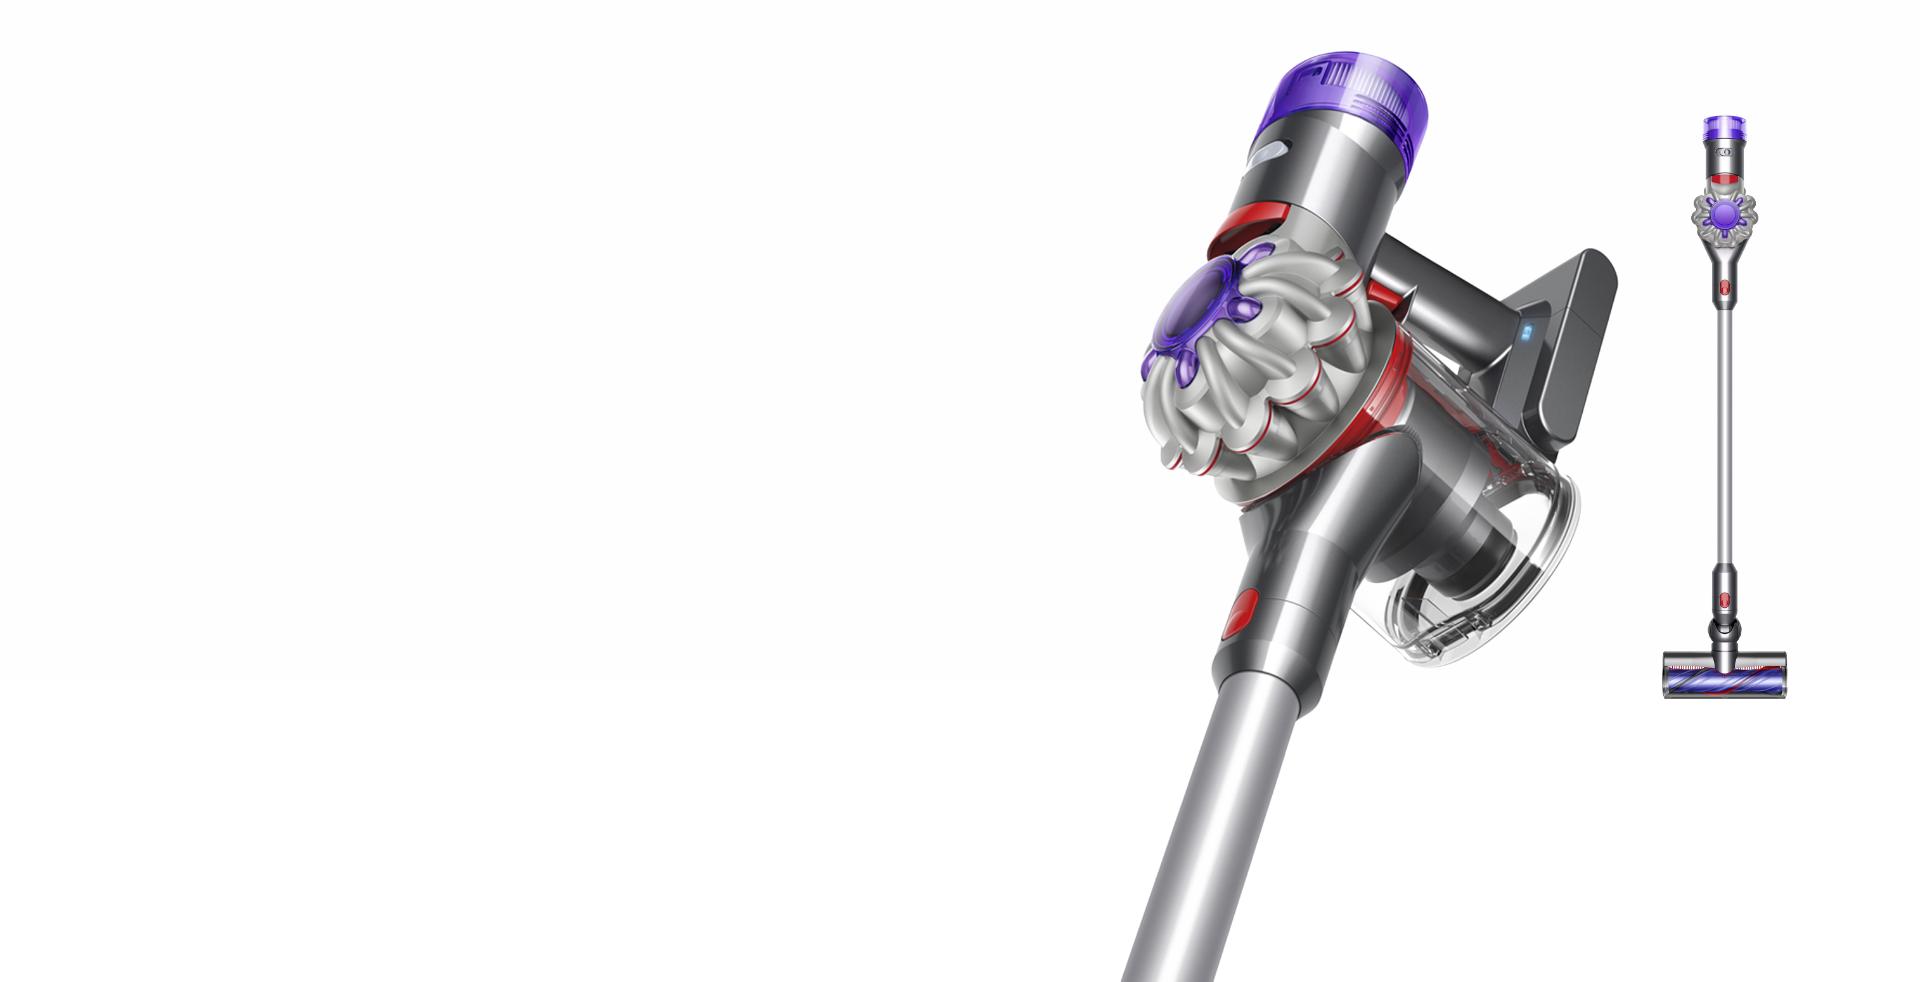 View from side on and infront of Dyson V7 Advanced vacuum cleaner